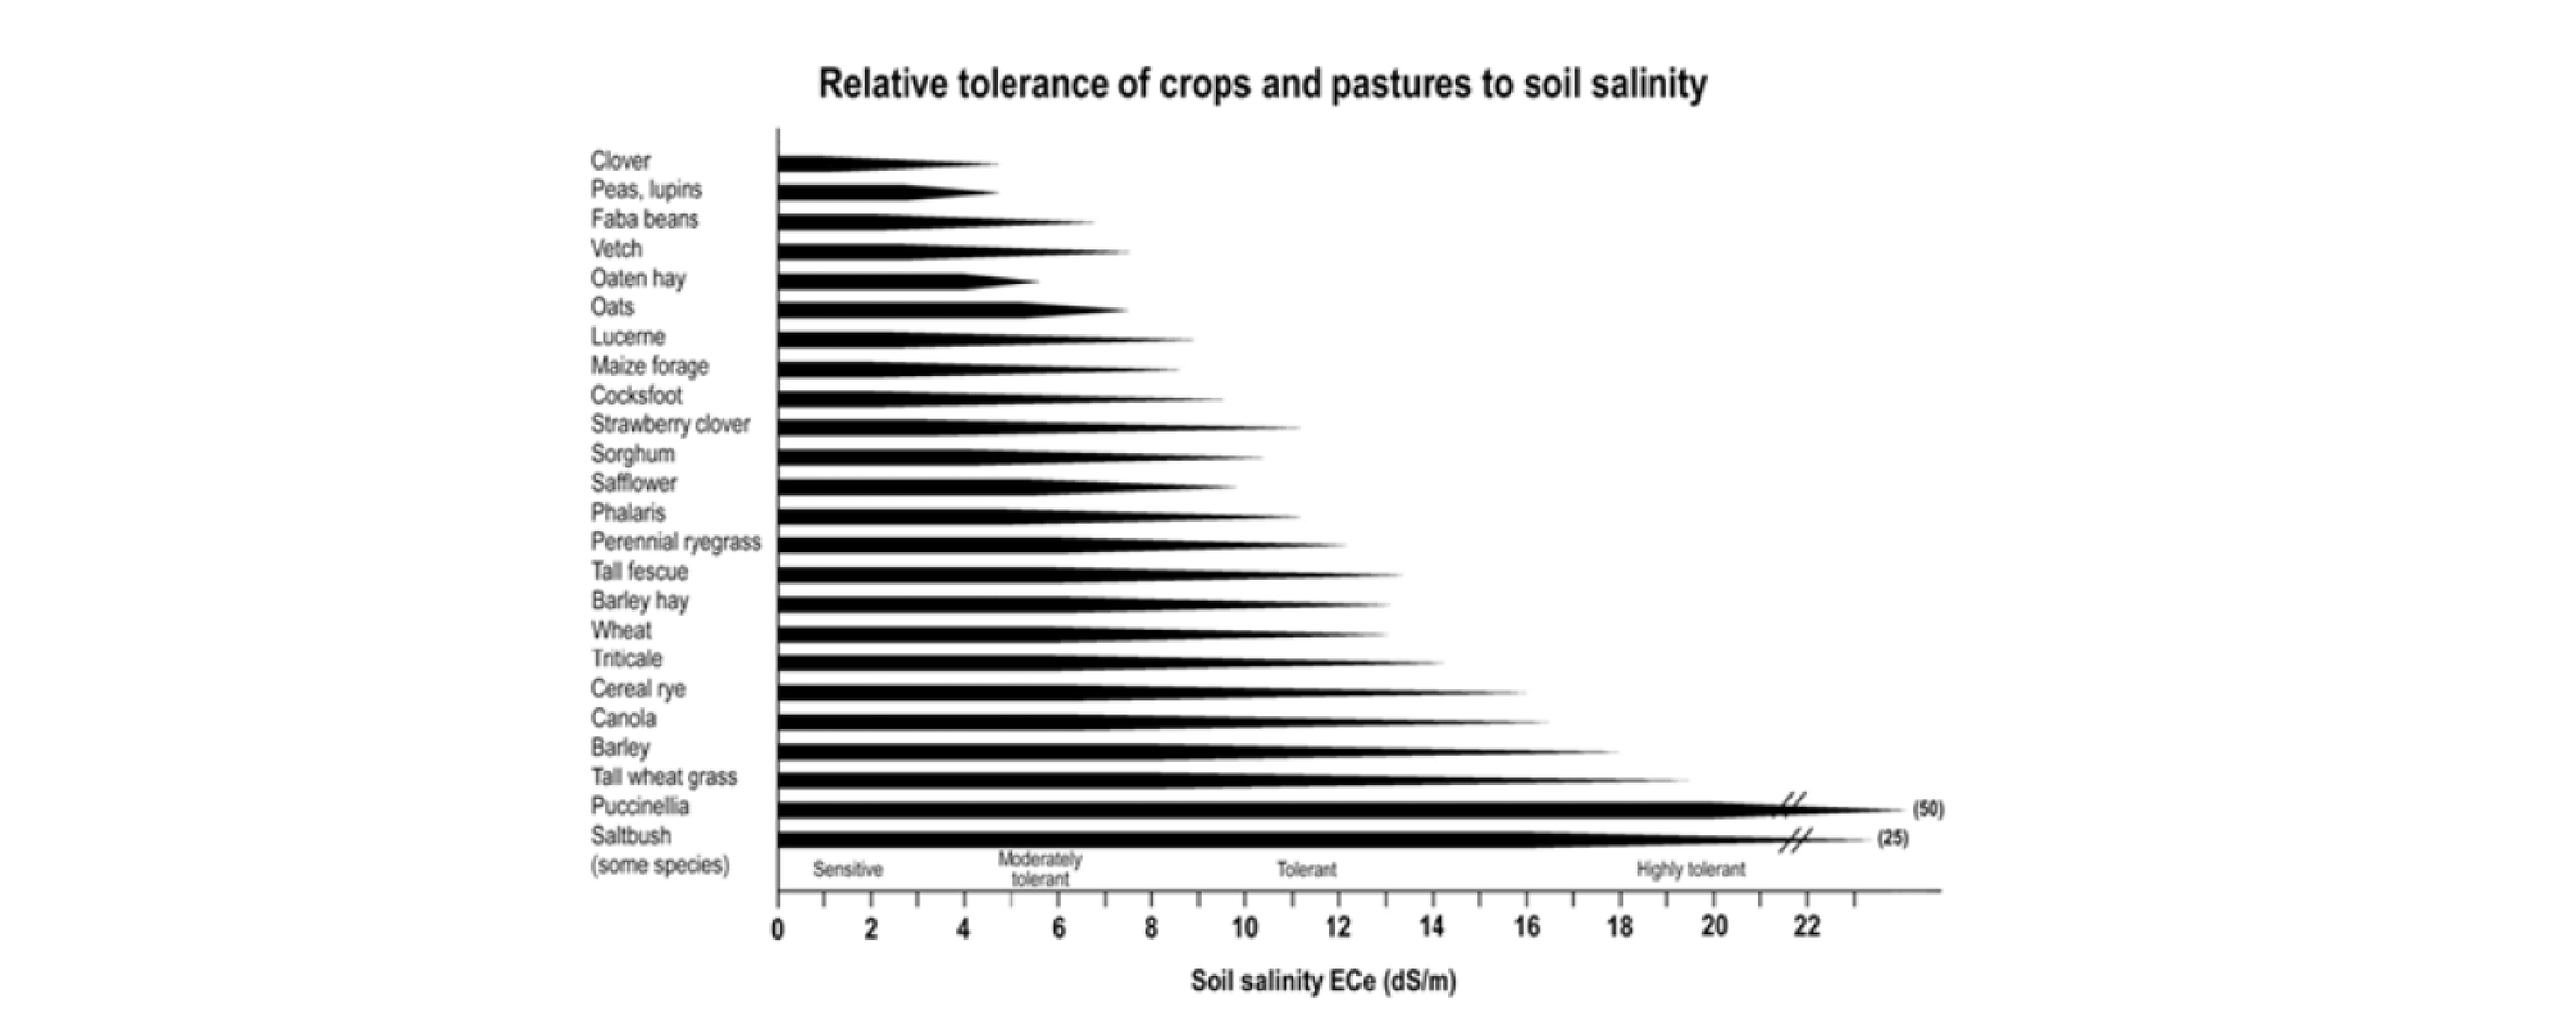 Figure A1-3: Relative tolerance of crops and pastures to soil salinity (36)